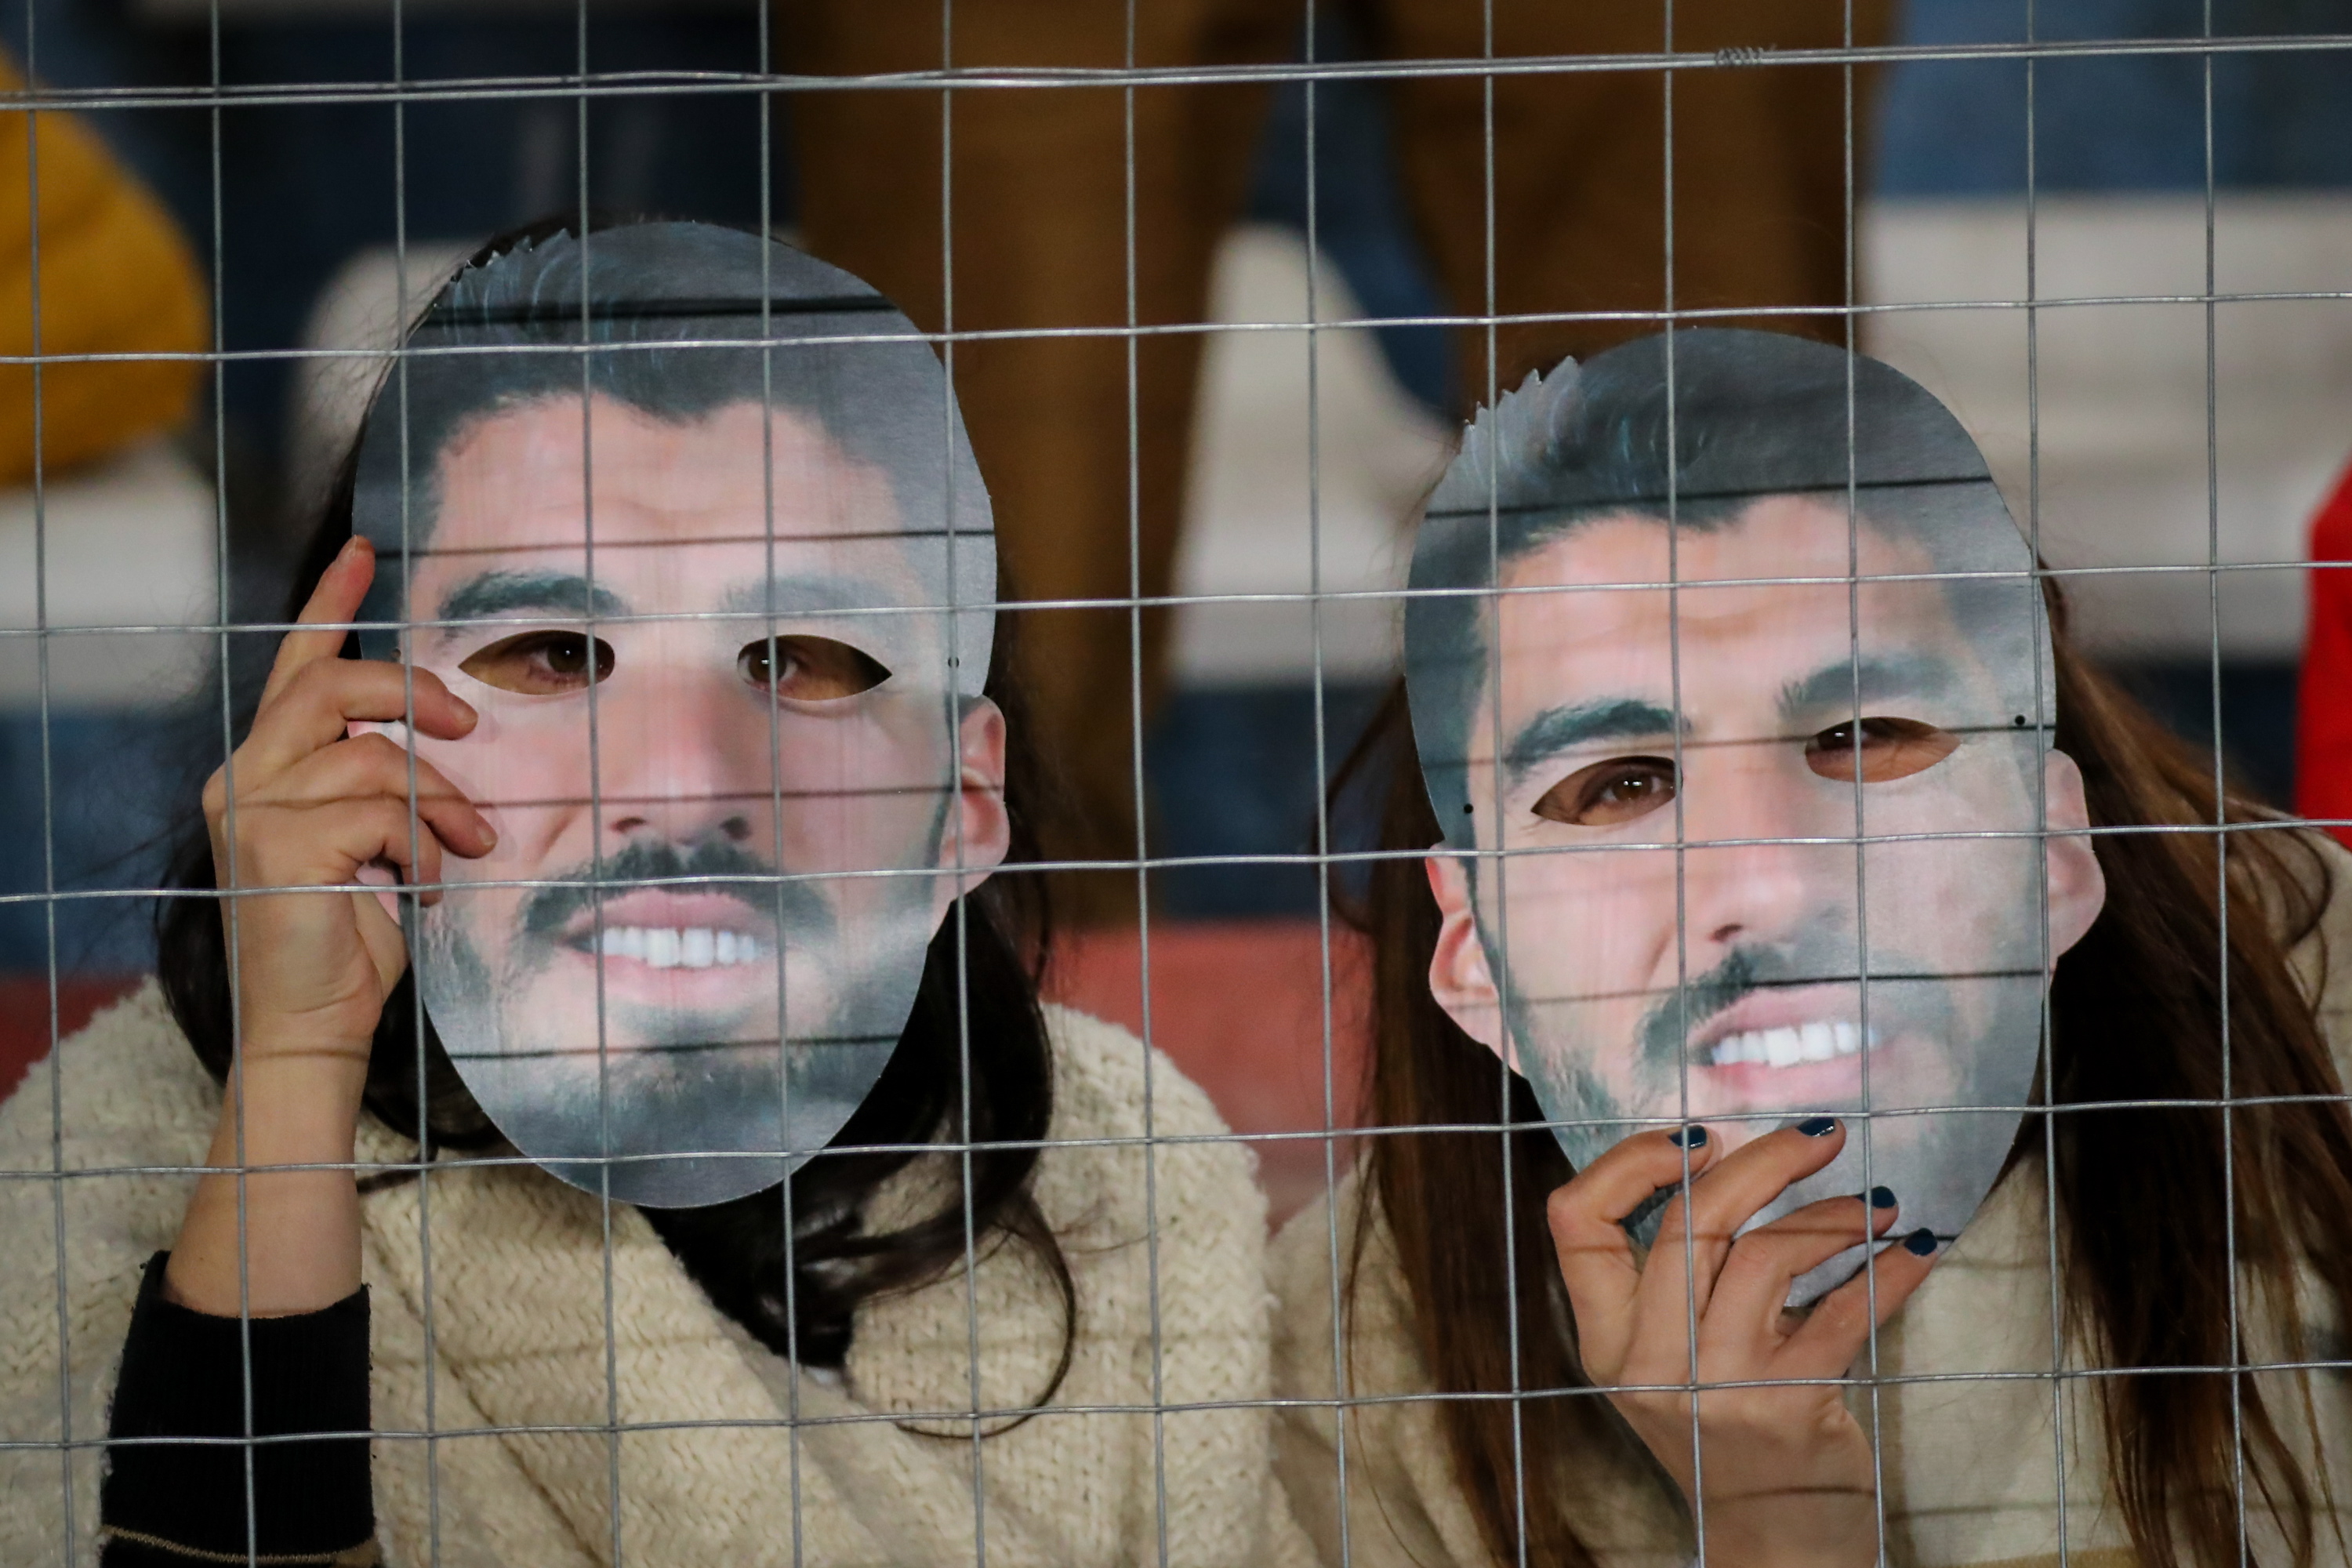 Nacional fans celebrated Luis Suarez's imminent return with face masks of the star